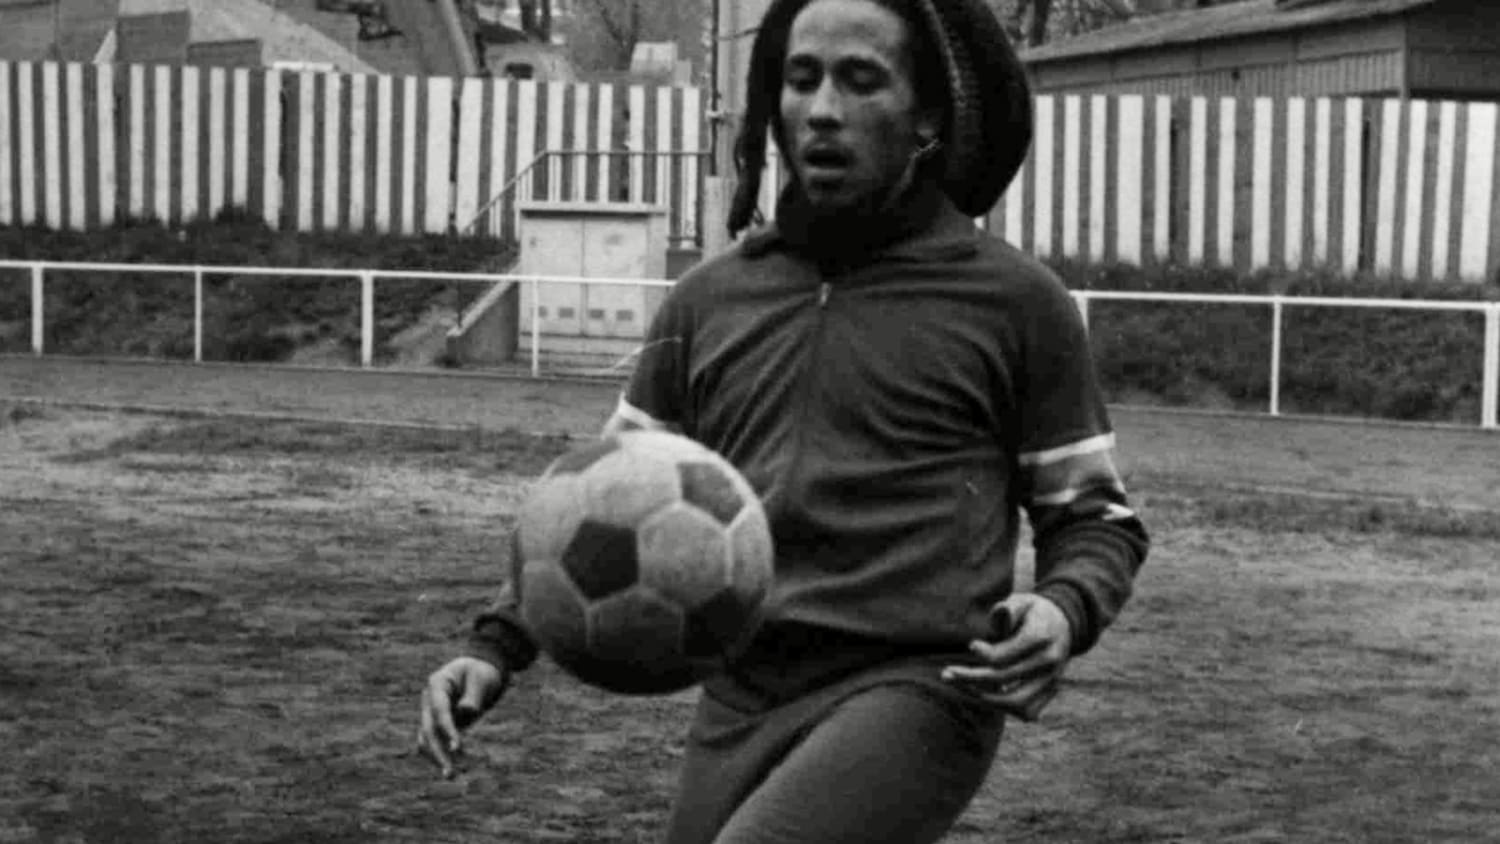 'Rhythm of the Game' Documents Bob Marley's Passion for Soccer